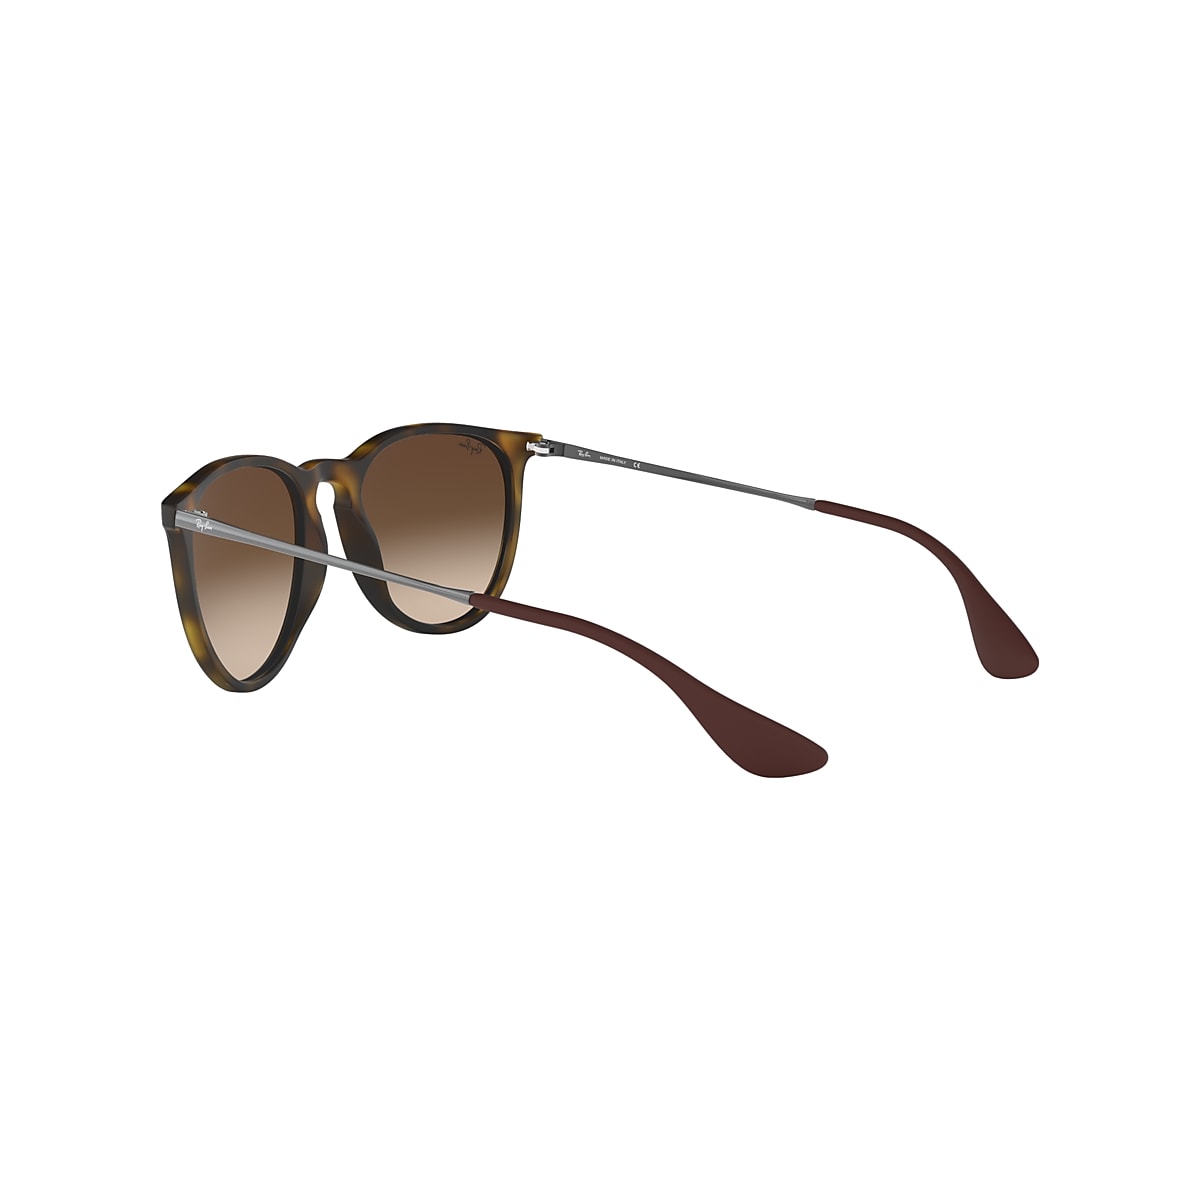 ERIKA CLASSIC Sunglasses in Havana and Brown - RB4171 | Ray-Ban® US